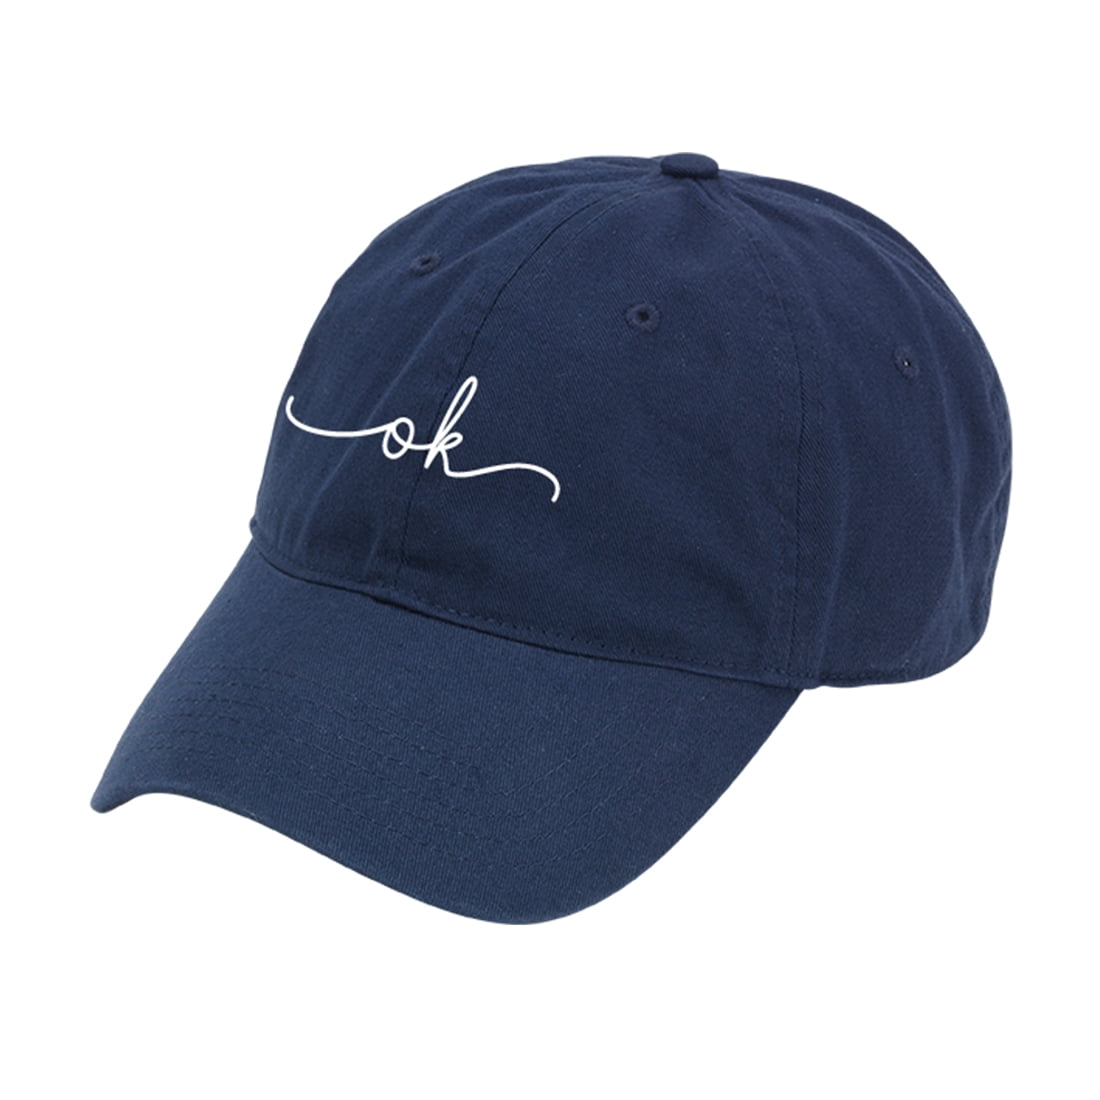 Oklahoma Rep Your State Navy Cap